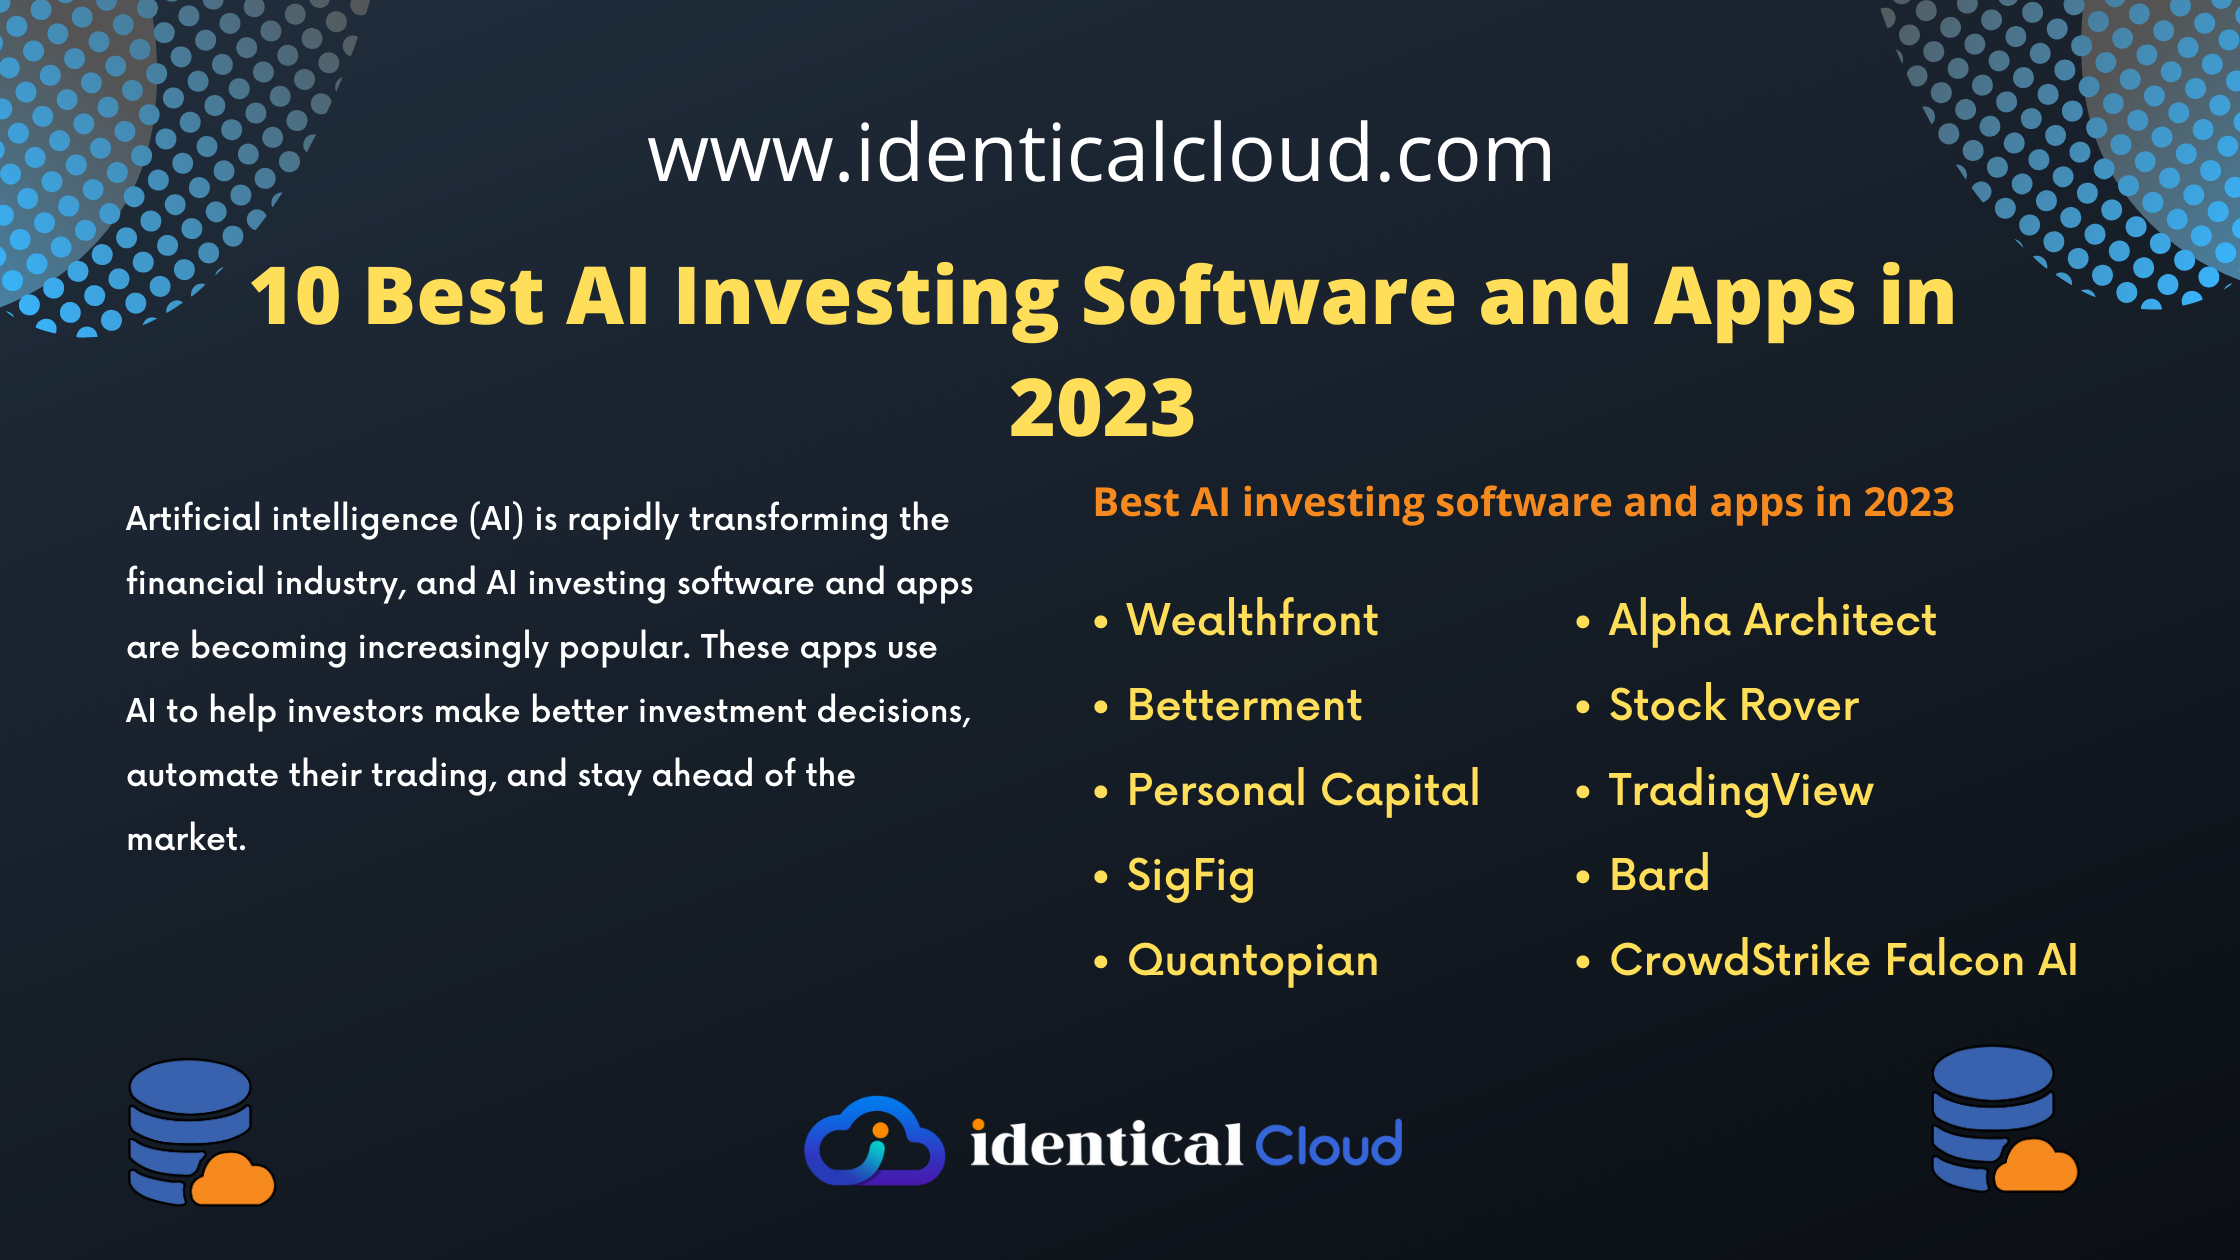 10 Best AI Investing Software and Apps in 2023 - identicalcloud.com